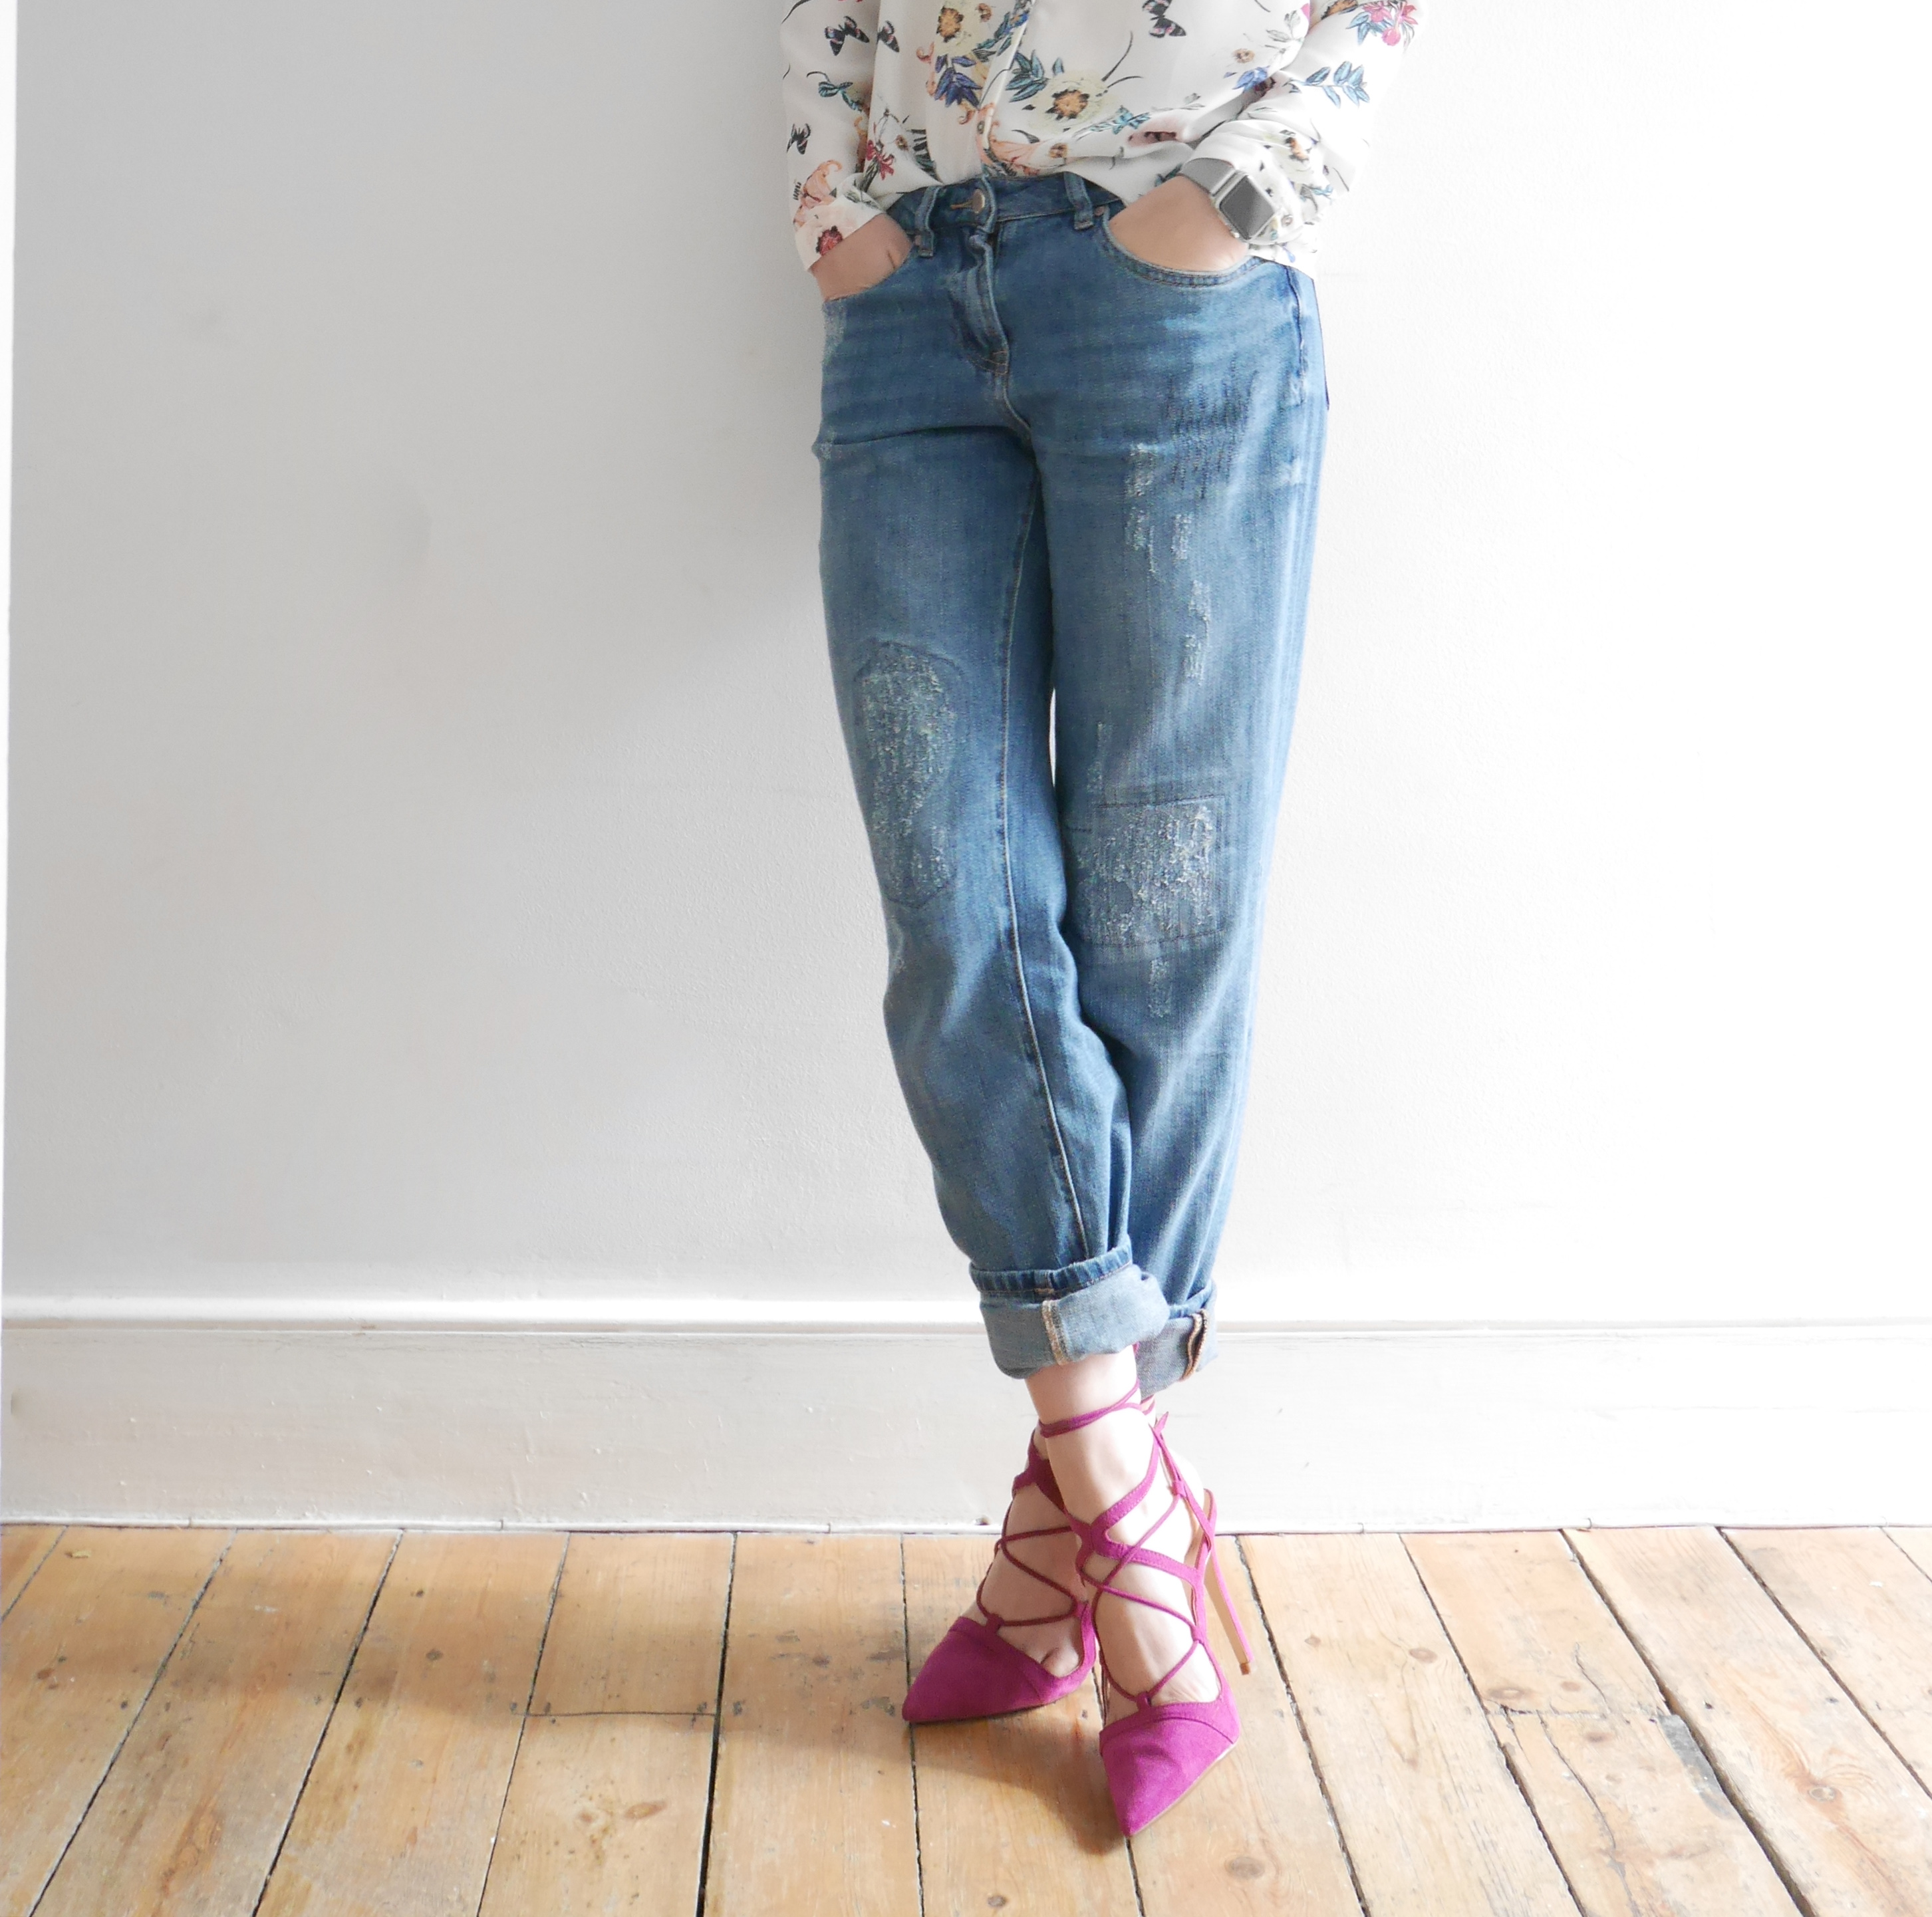 coco mama style | george | outfit inspiration| distressed boyfriend jeans